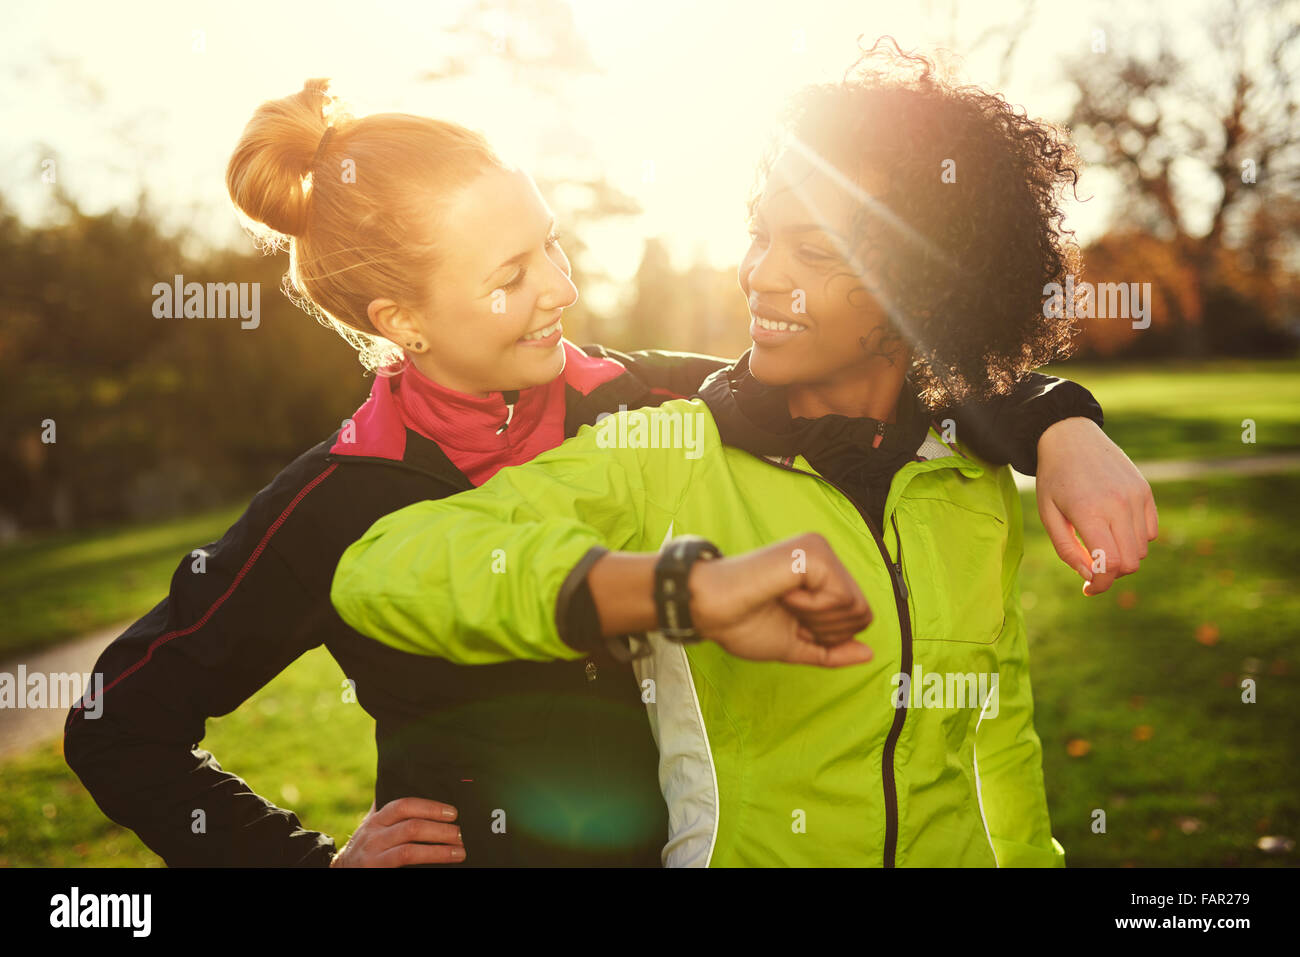 Two girlfriends in sportswear looking at each other while hugging in sunny park after workout Stock Photo